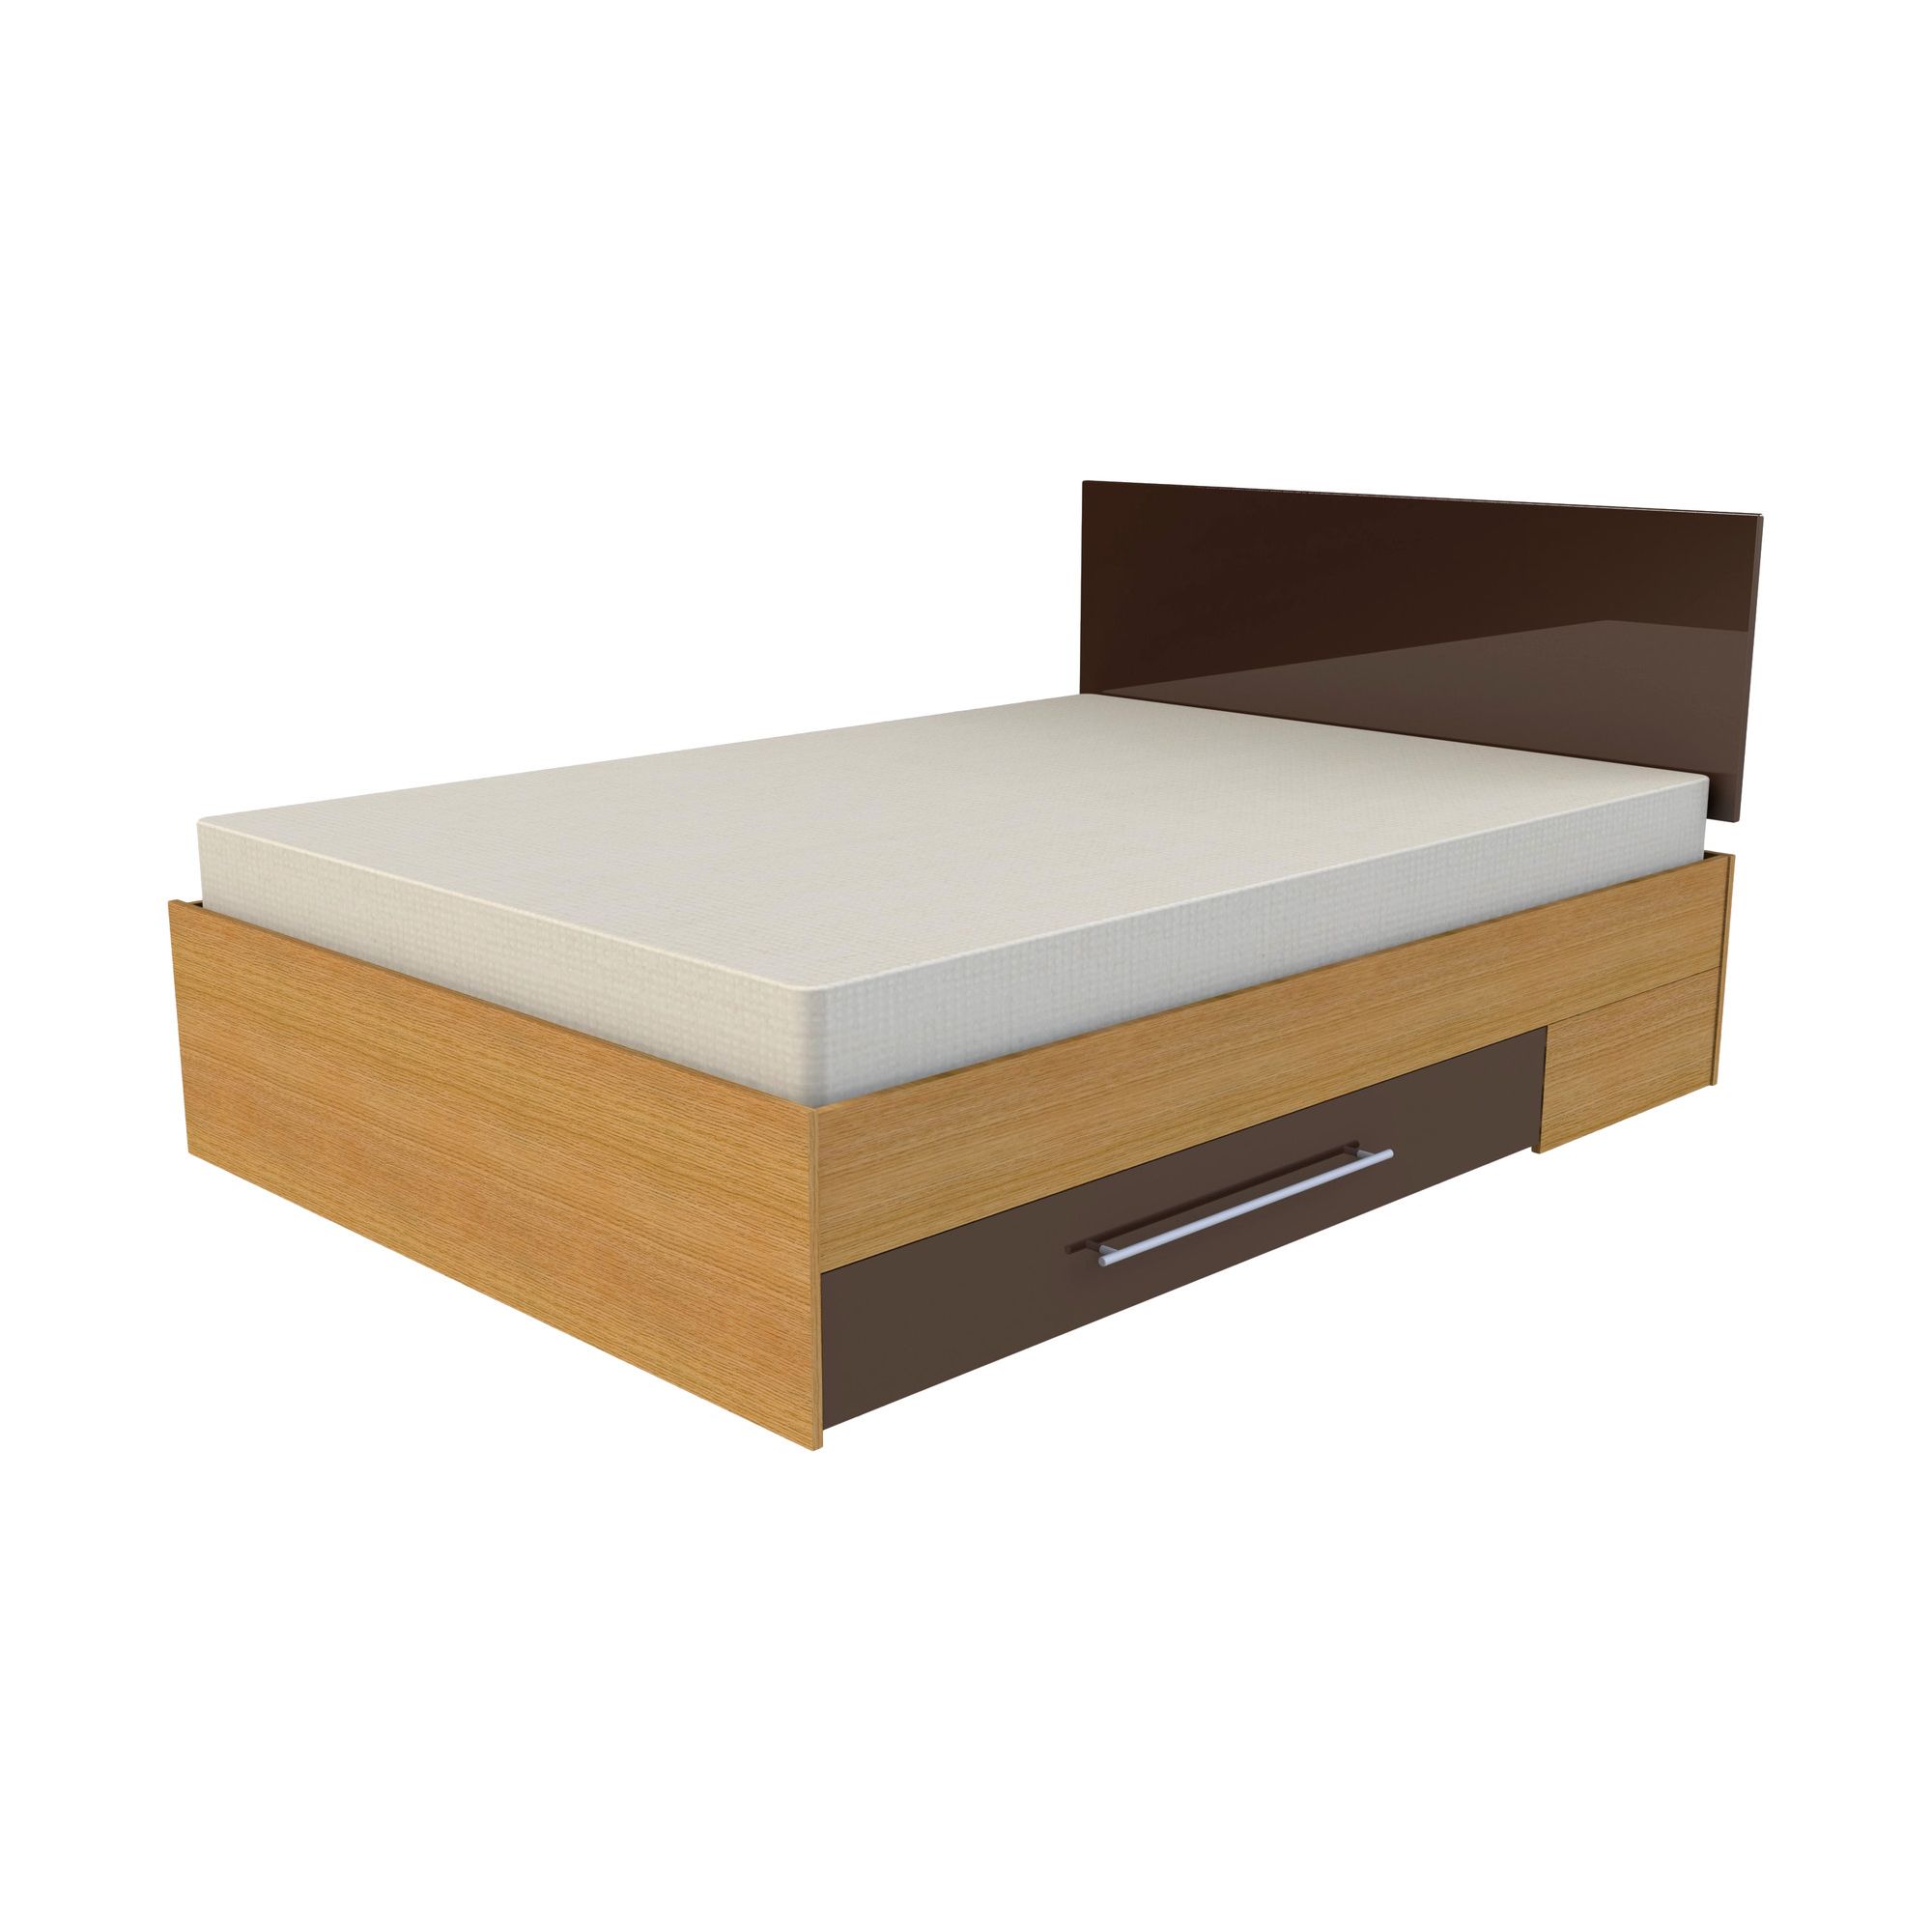 Ashcraft Modular Storage Double Bed - Oak With Chocolate Gloss at Tesco Direct